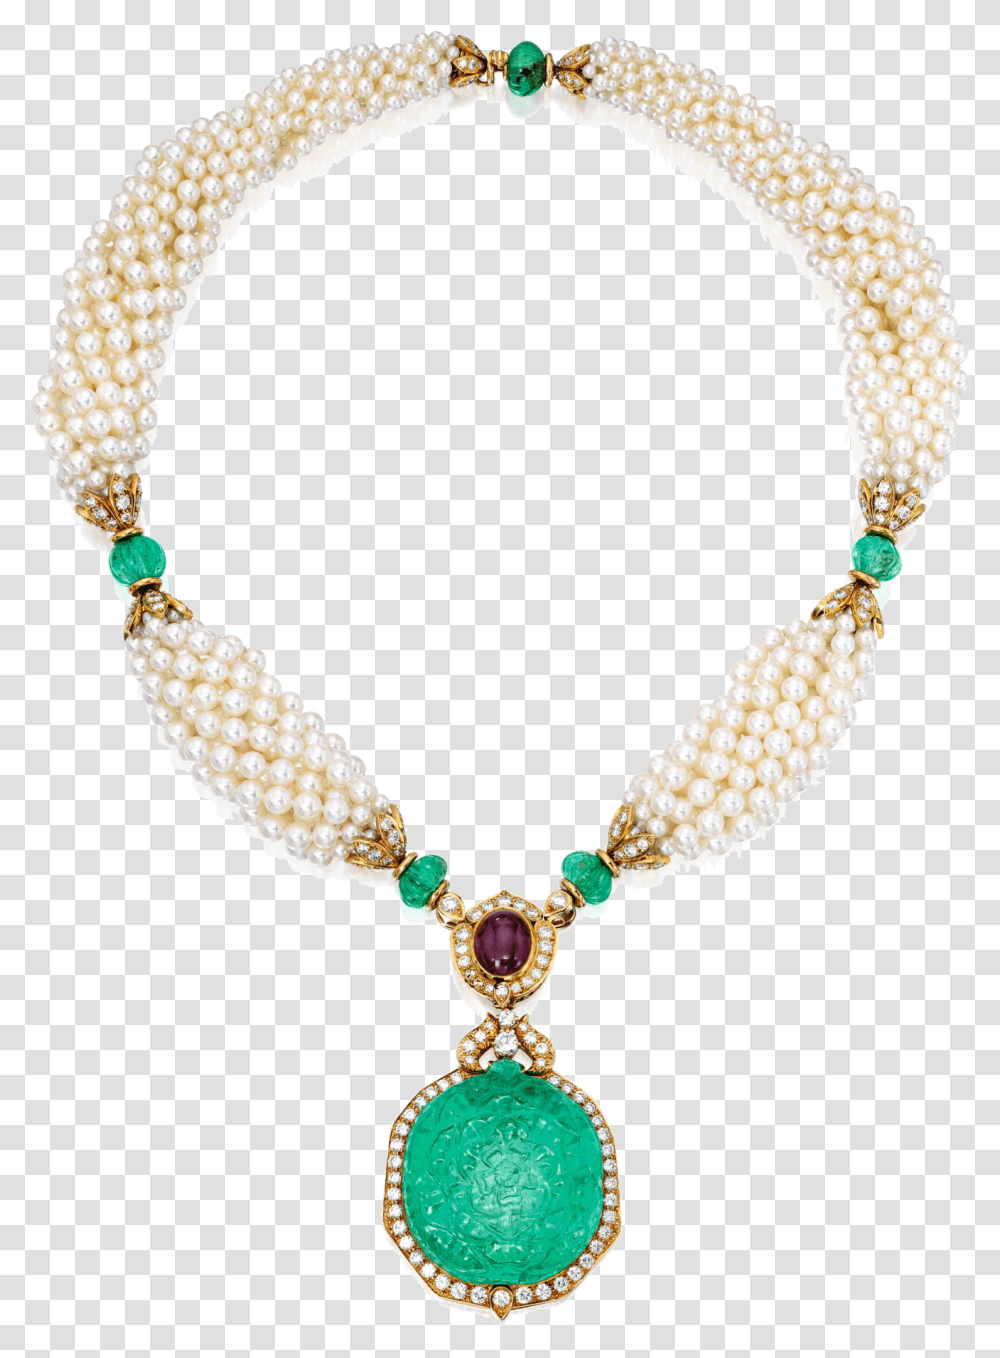 Antiquity Jewelry Art Deco, Necklace, Accessories, Accessory, Ornament Transparent Png